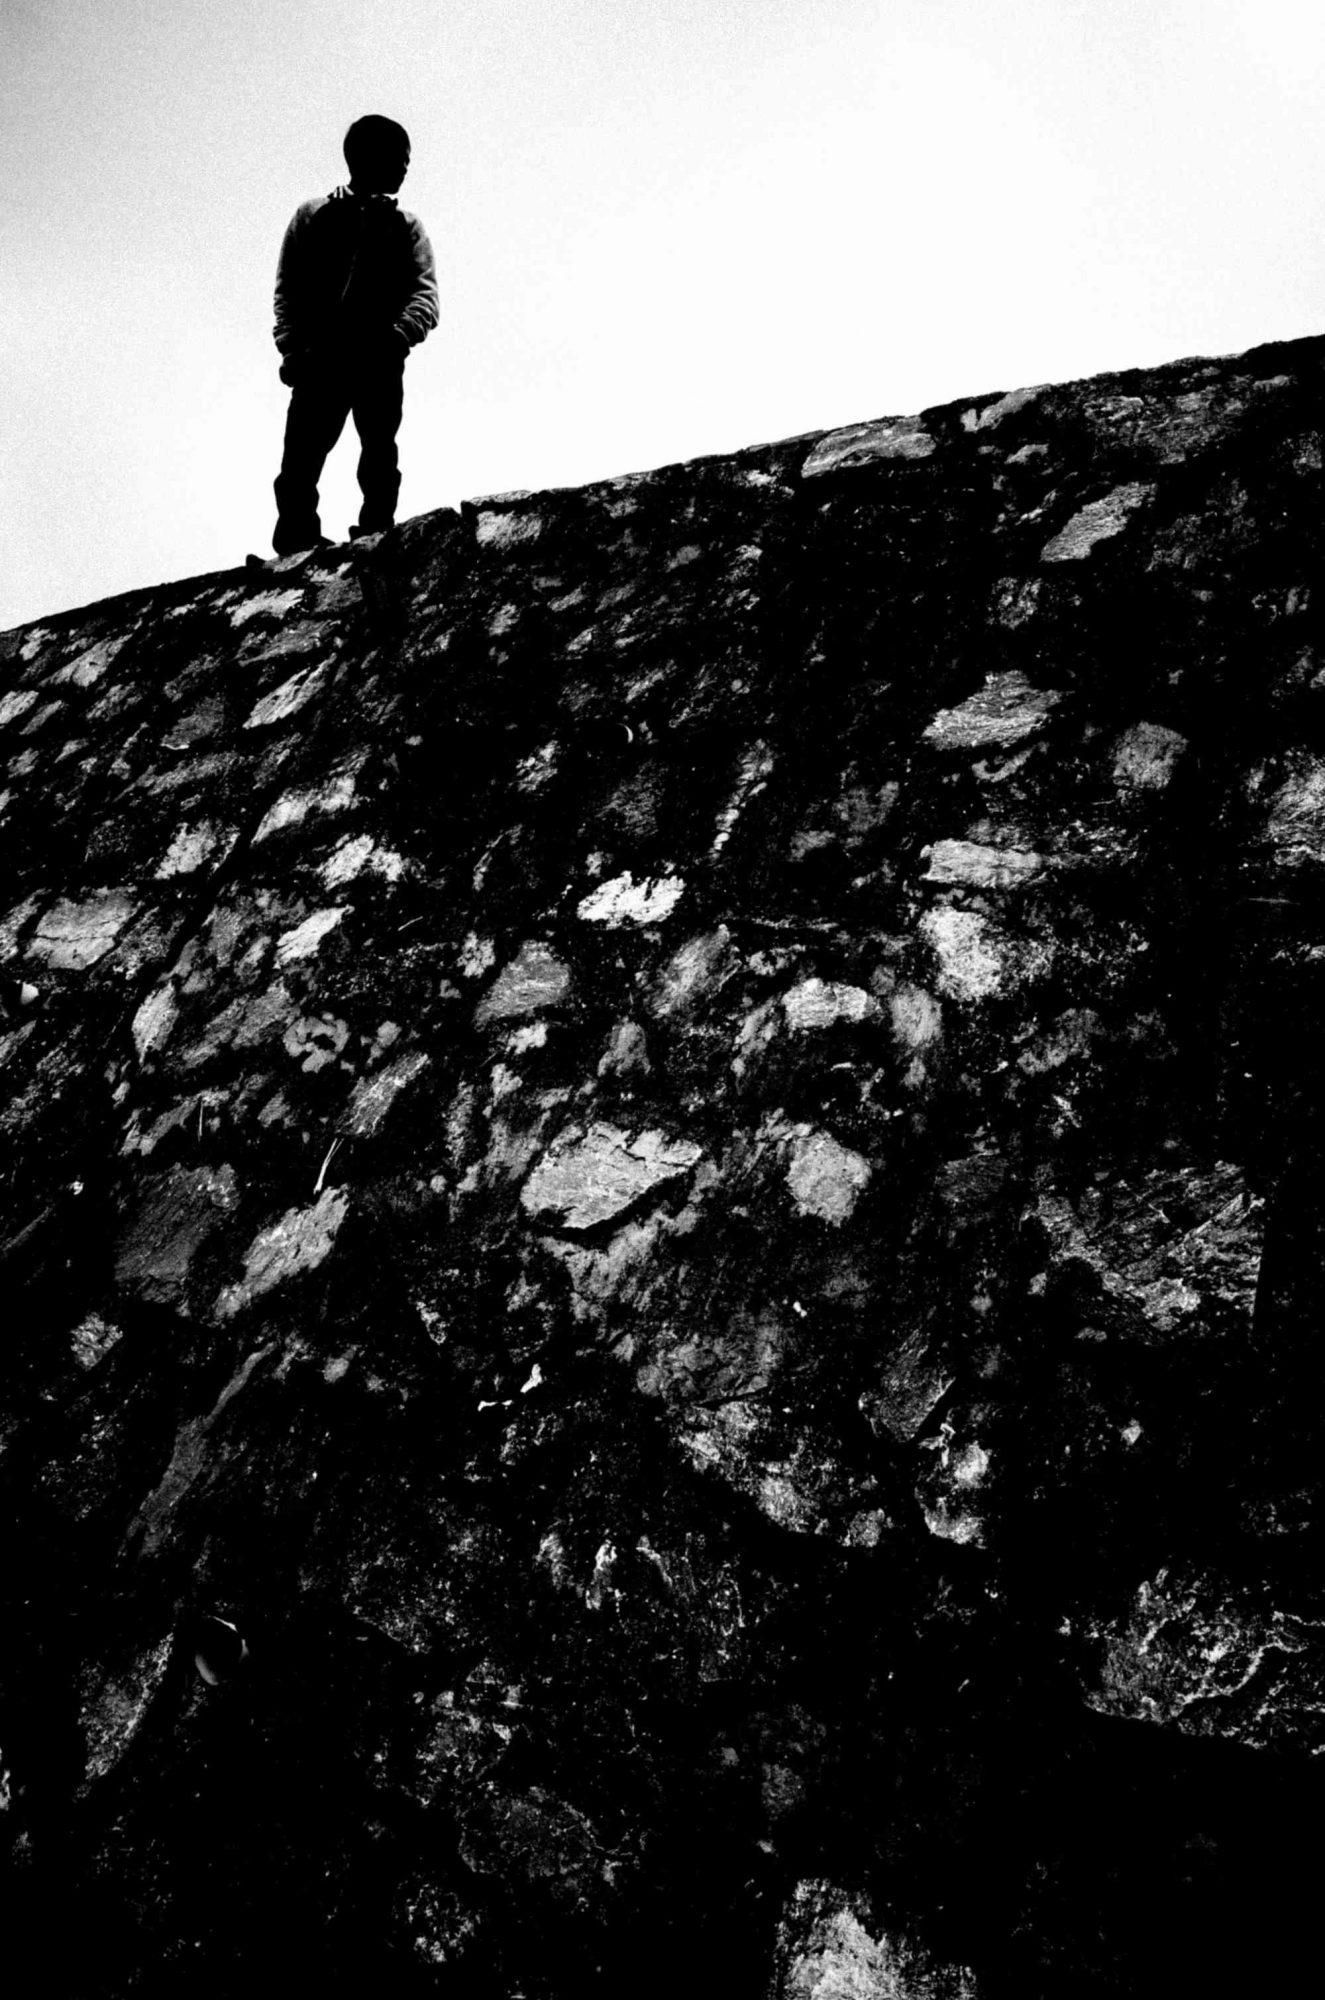 Simple figure to ground composition. Man in silhouette in black in top left of frame against white sky.